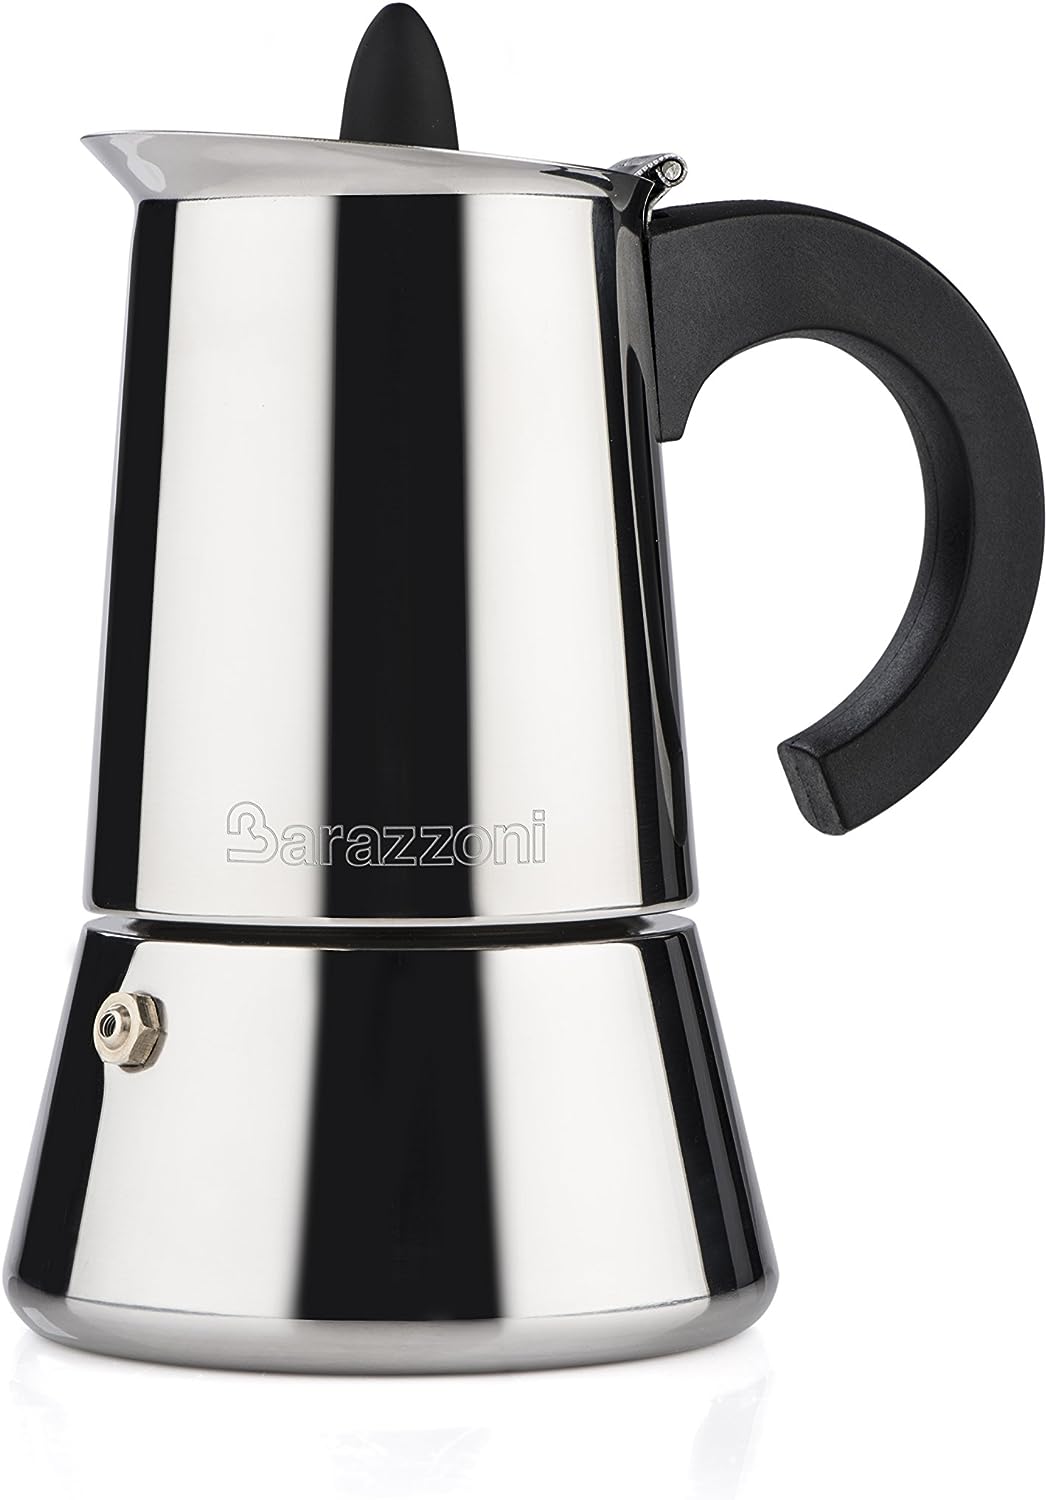 Barazzoni Coffee Maker 2 Cups, Stainless Steel